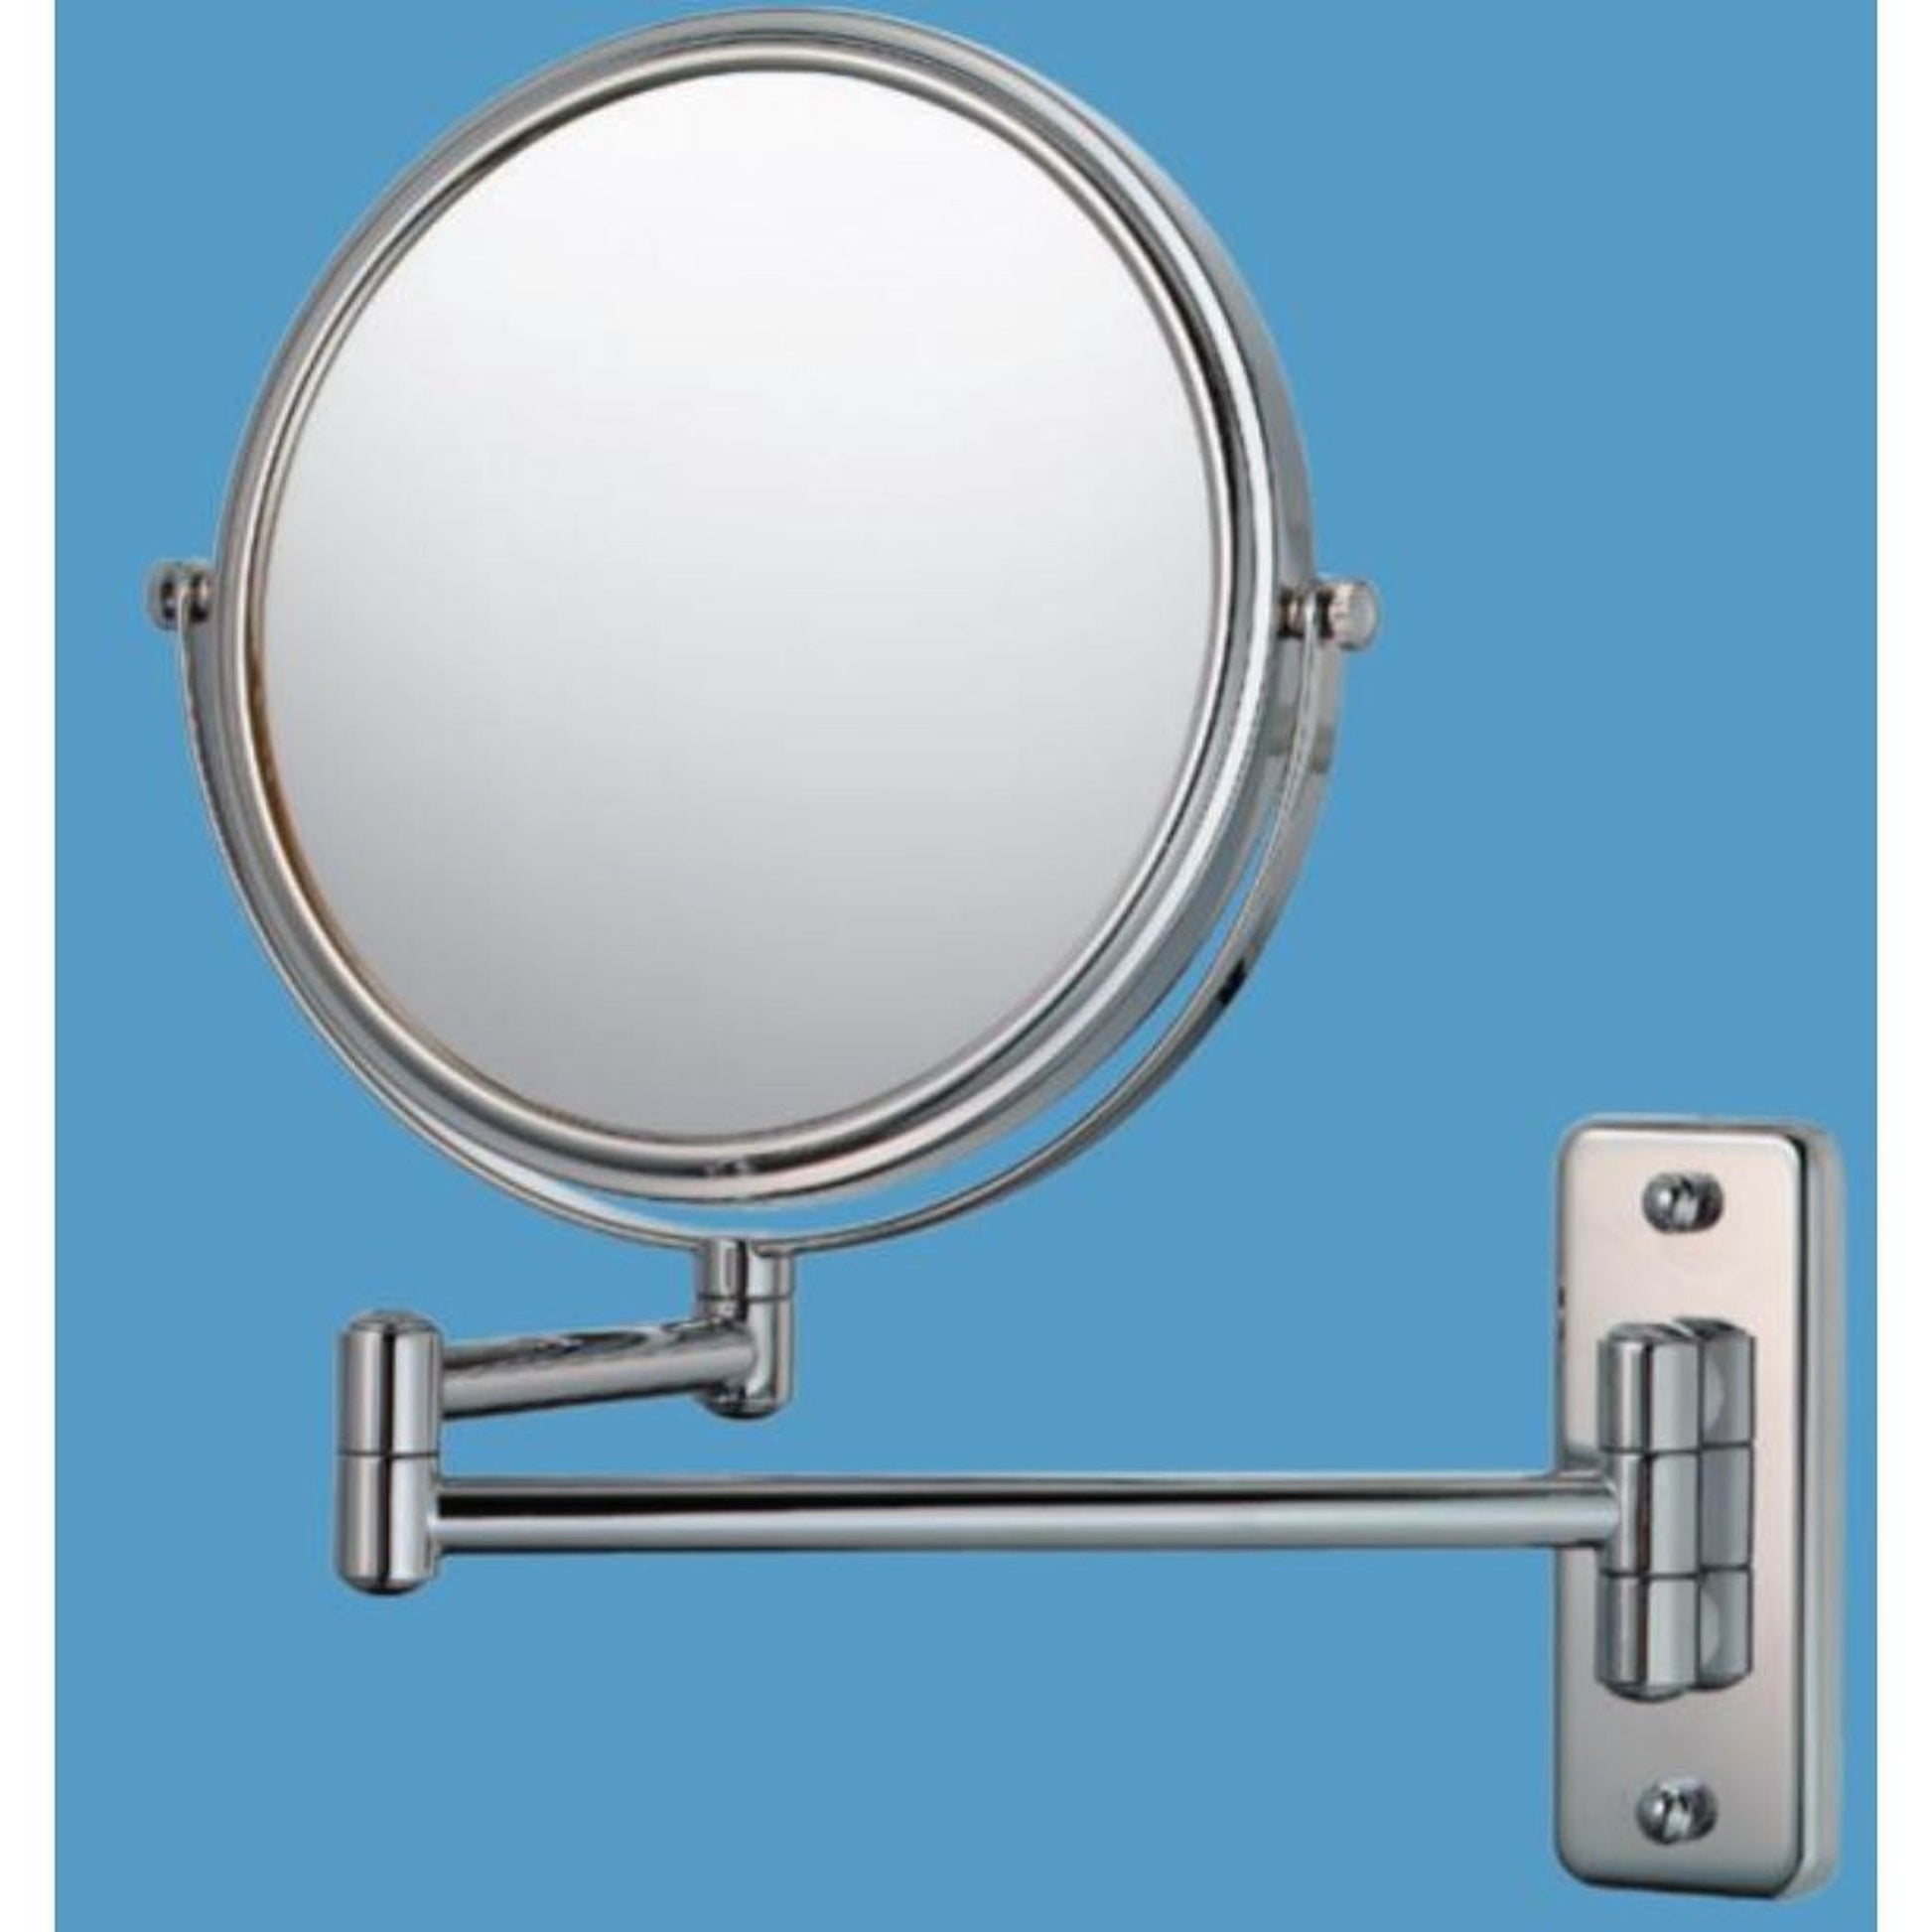 Aptations Mirror Image 10" x 12" Chrome Wall-Mounted Round Double Sided Double Arm 1X/5X Magnified Makeup Mirror